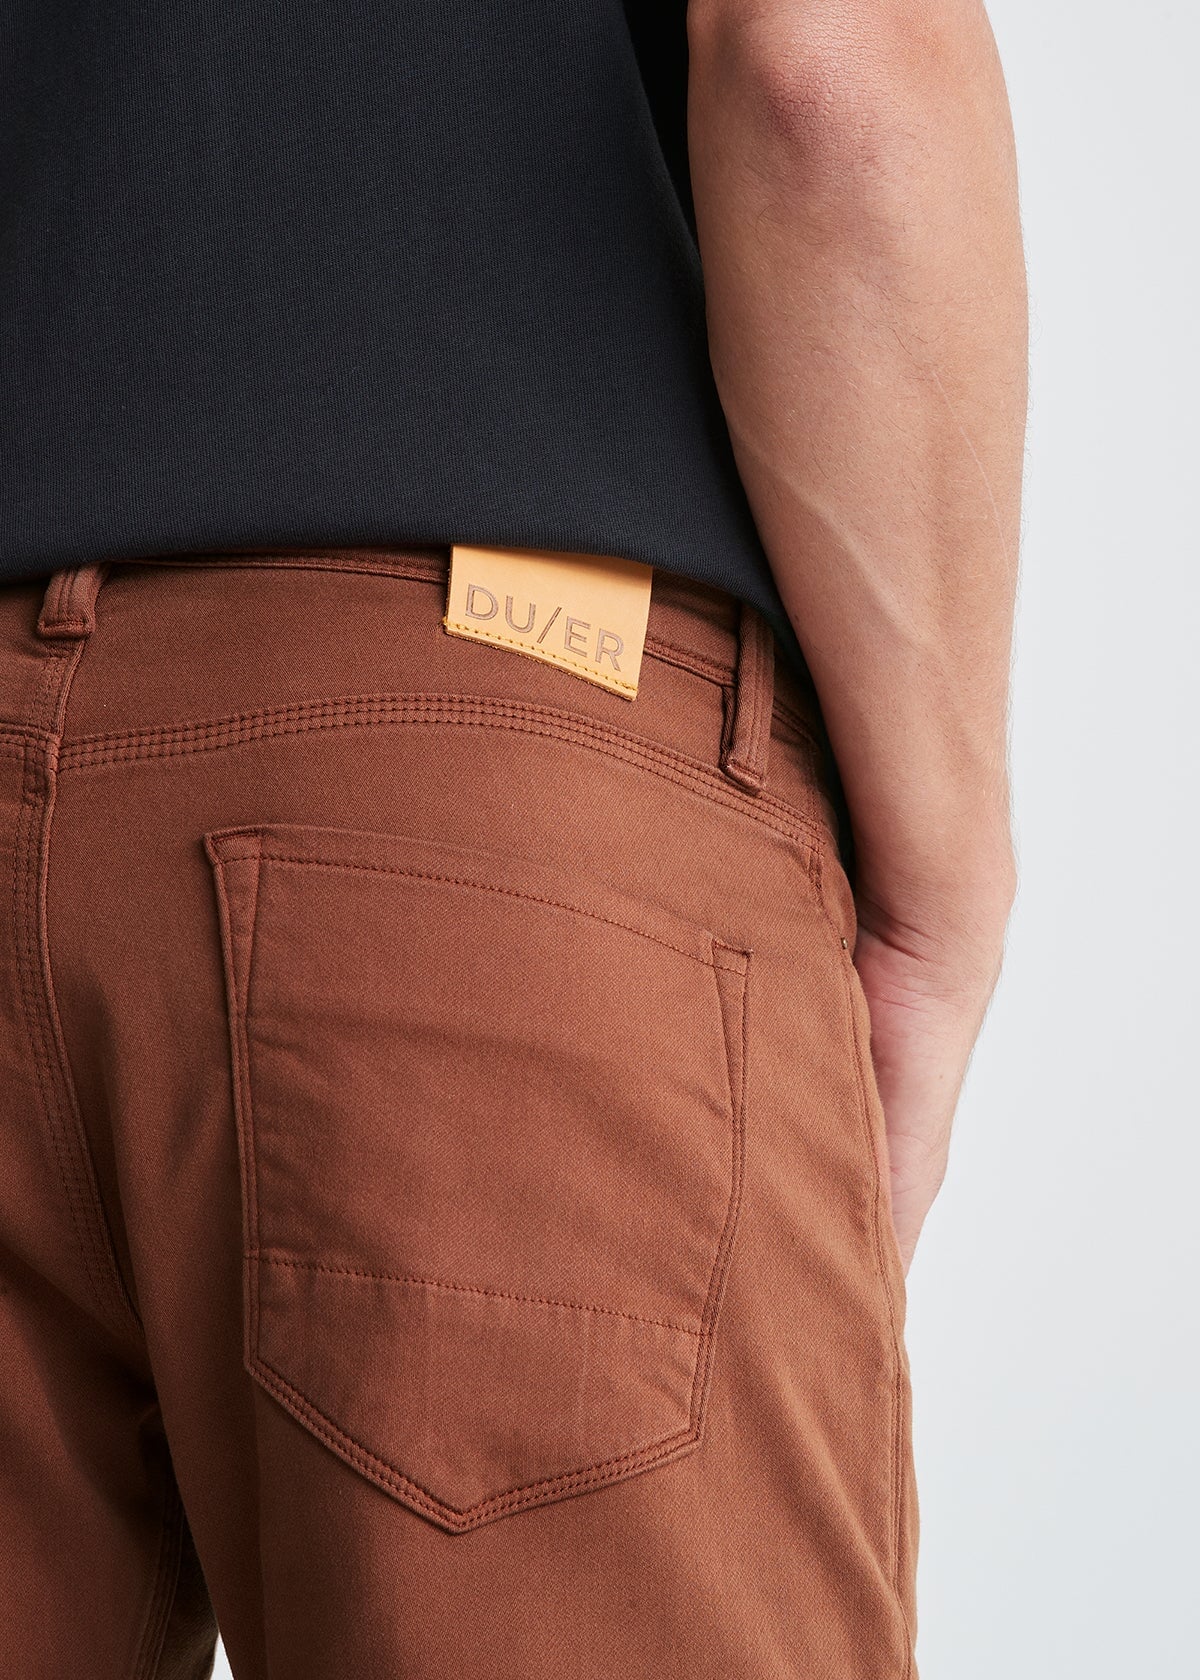 mens red-brown relaxed fit dress sweatpant back pocket and patch detail